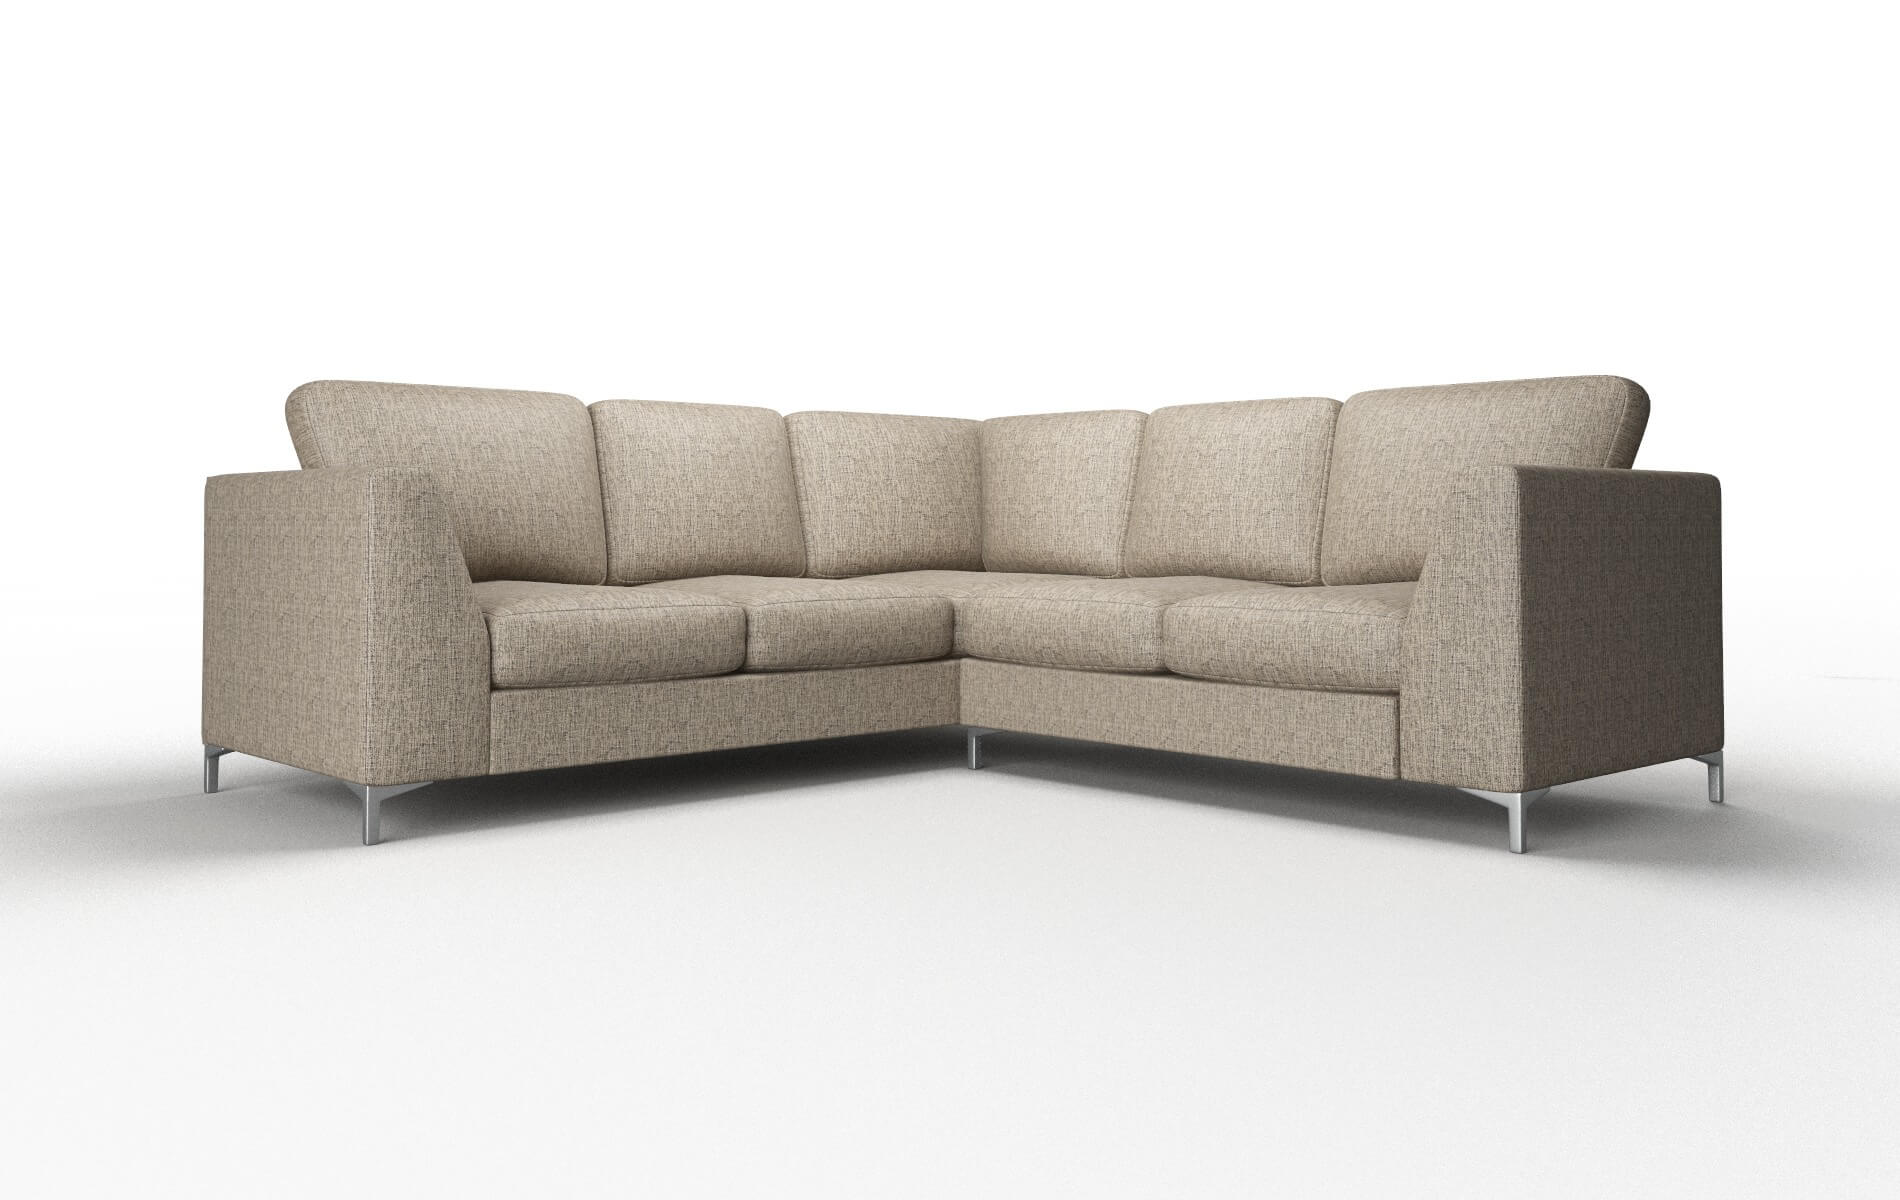 Royal Solifestyle 51 Sectional metal legs